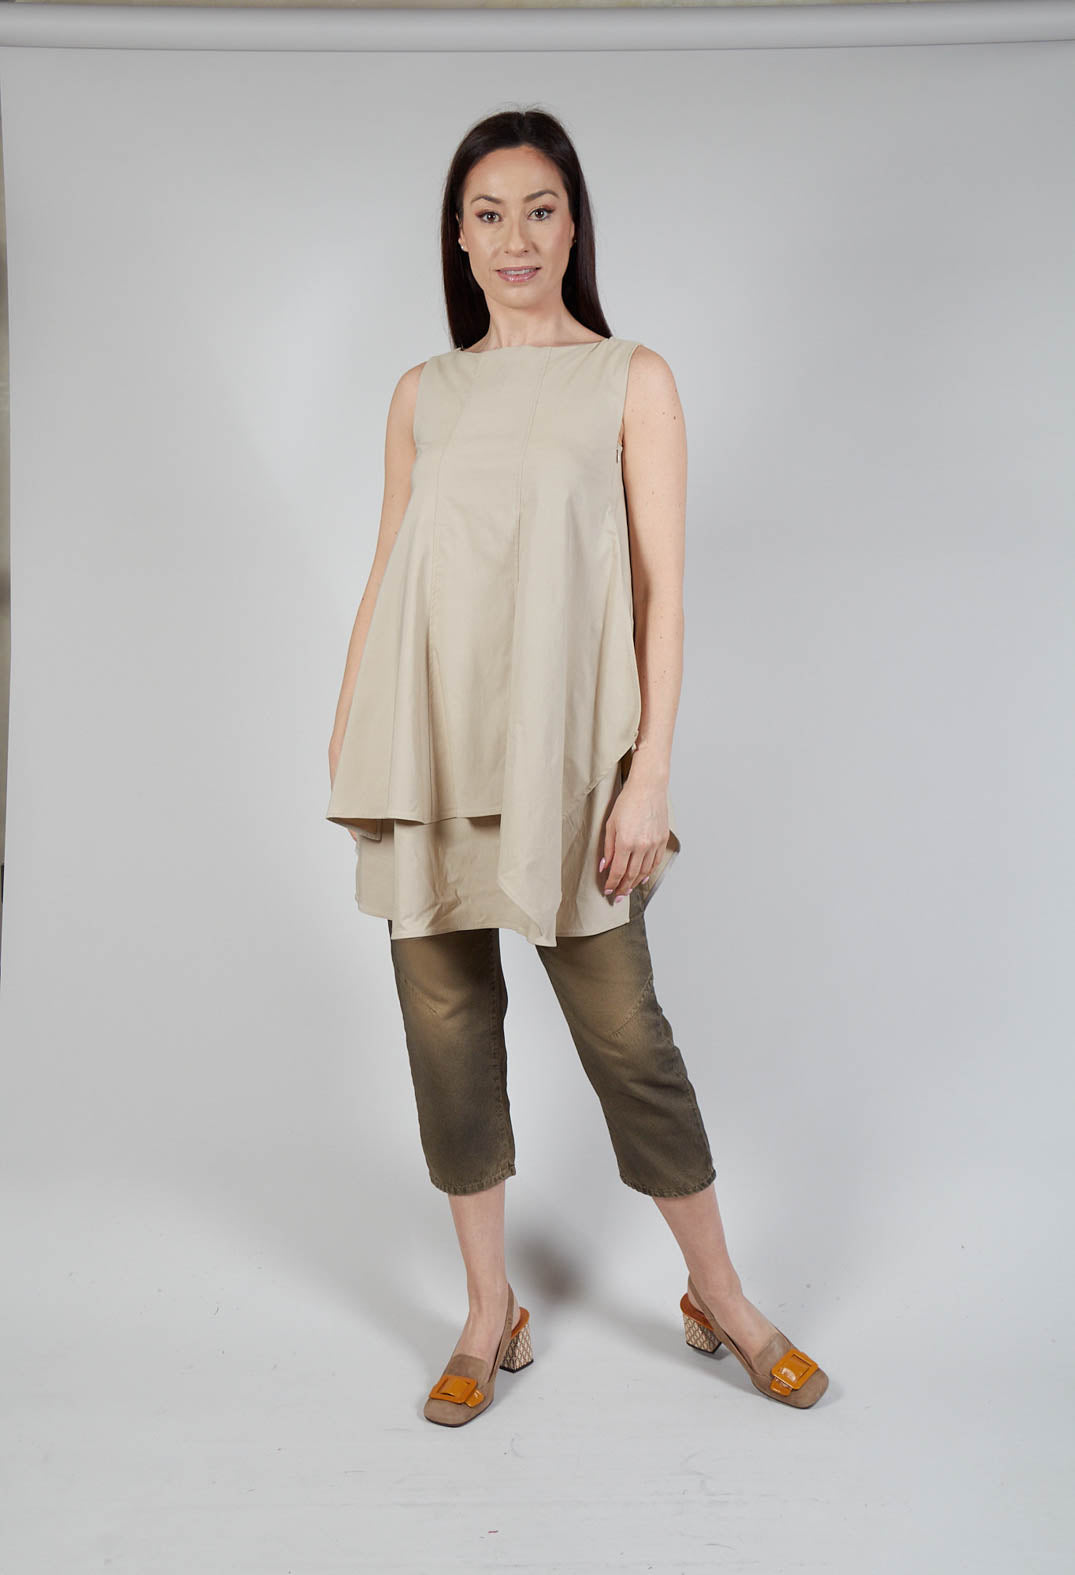 Pulp Fiction Tunic Top in Sabbia